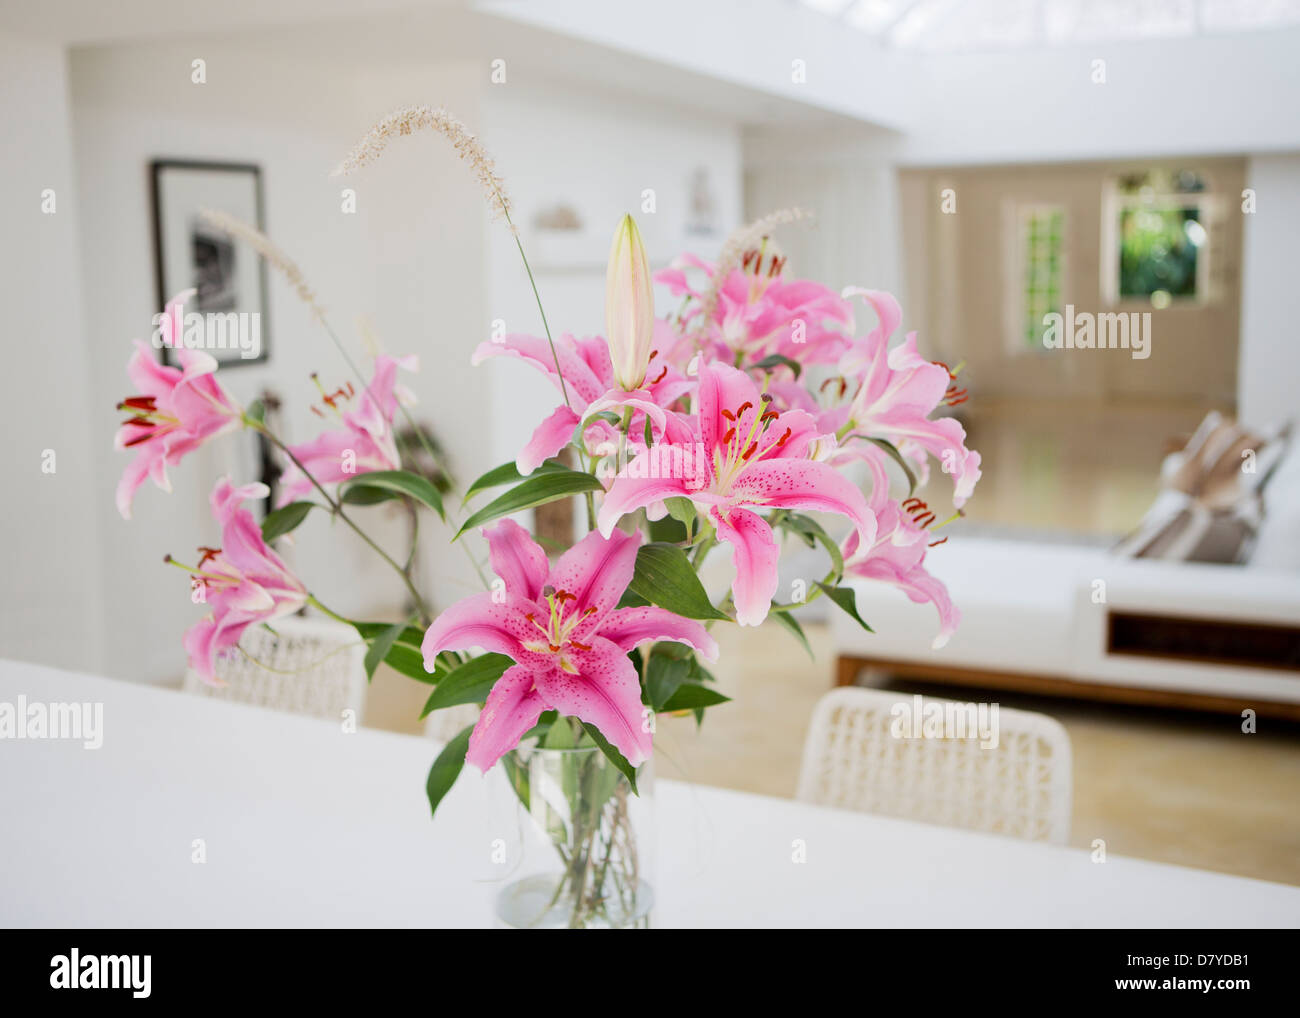 Bouquet of flowers on dining table Stock Photo